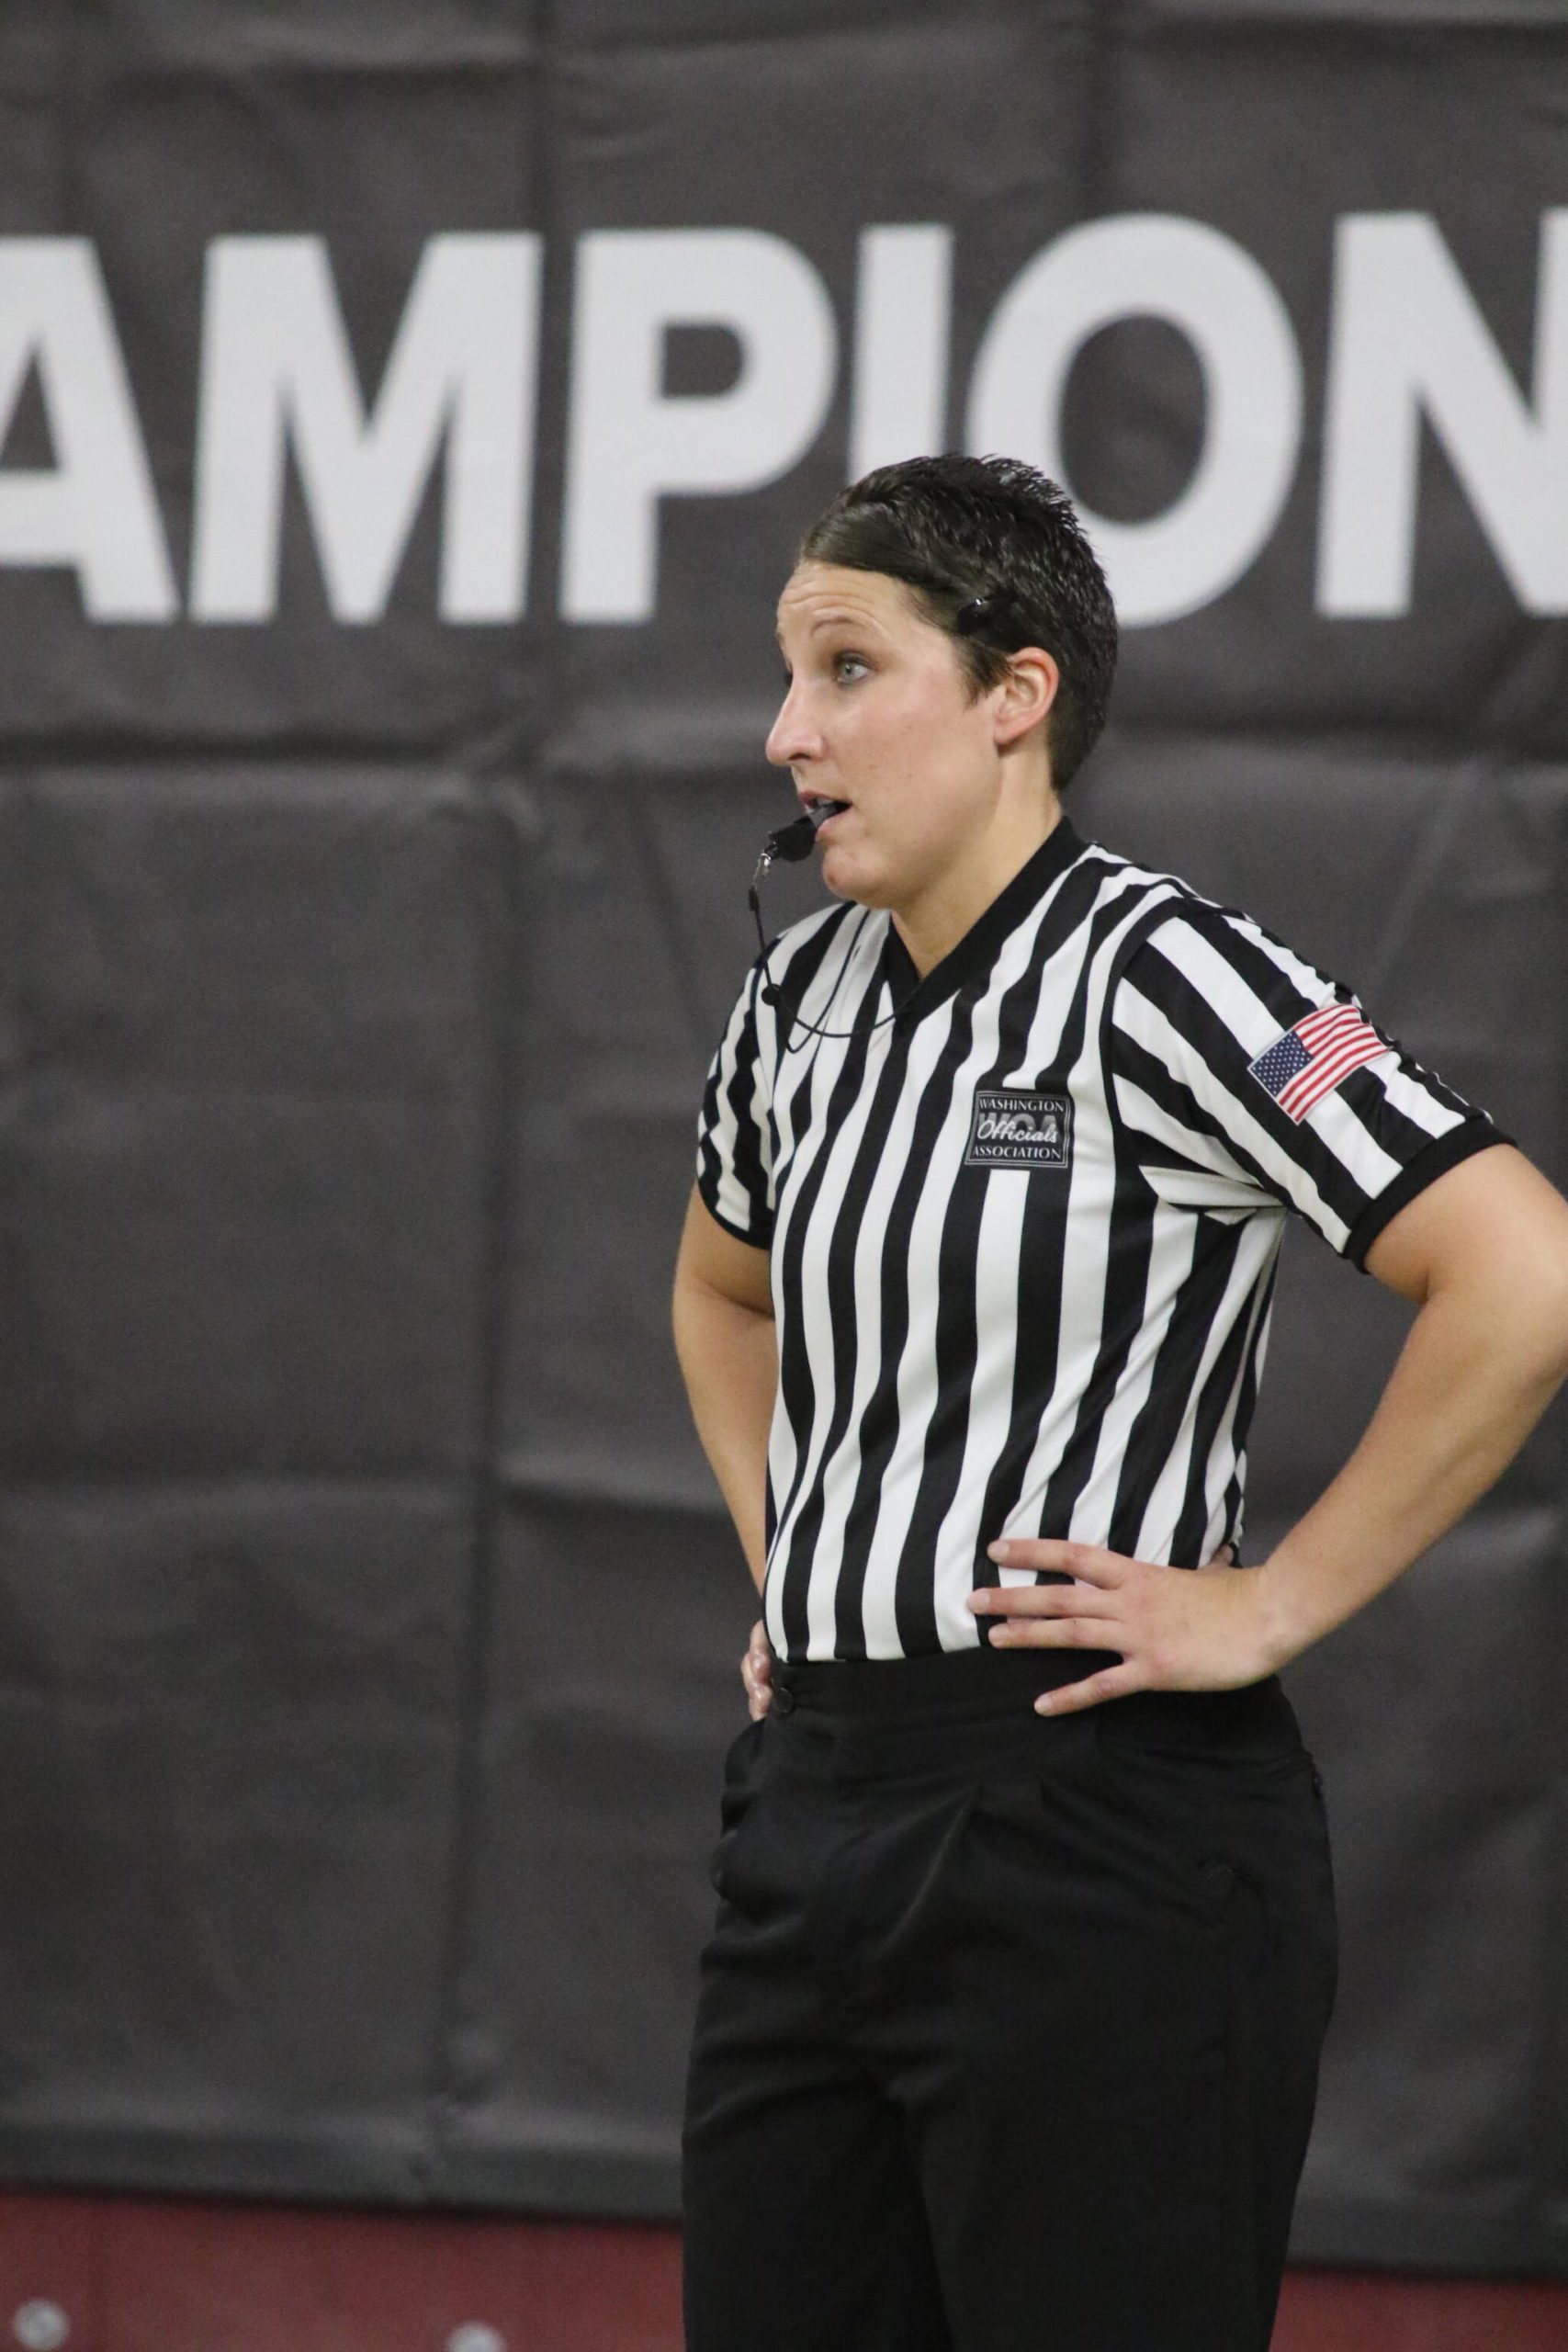 Hoquiam Middle School teacher Megan Pumphrey officiates a game at WIAA State Basketball Tournament in Yakima. Pumphrey was the only female referee present at the A-tournament level. Photo courtesy of Northwest Sports Photography